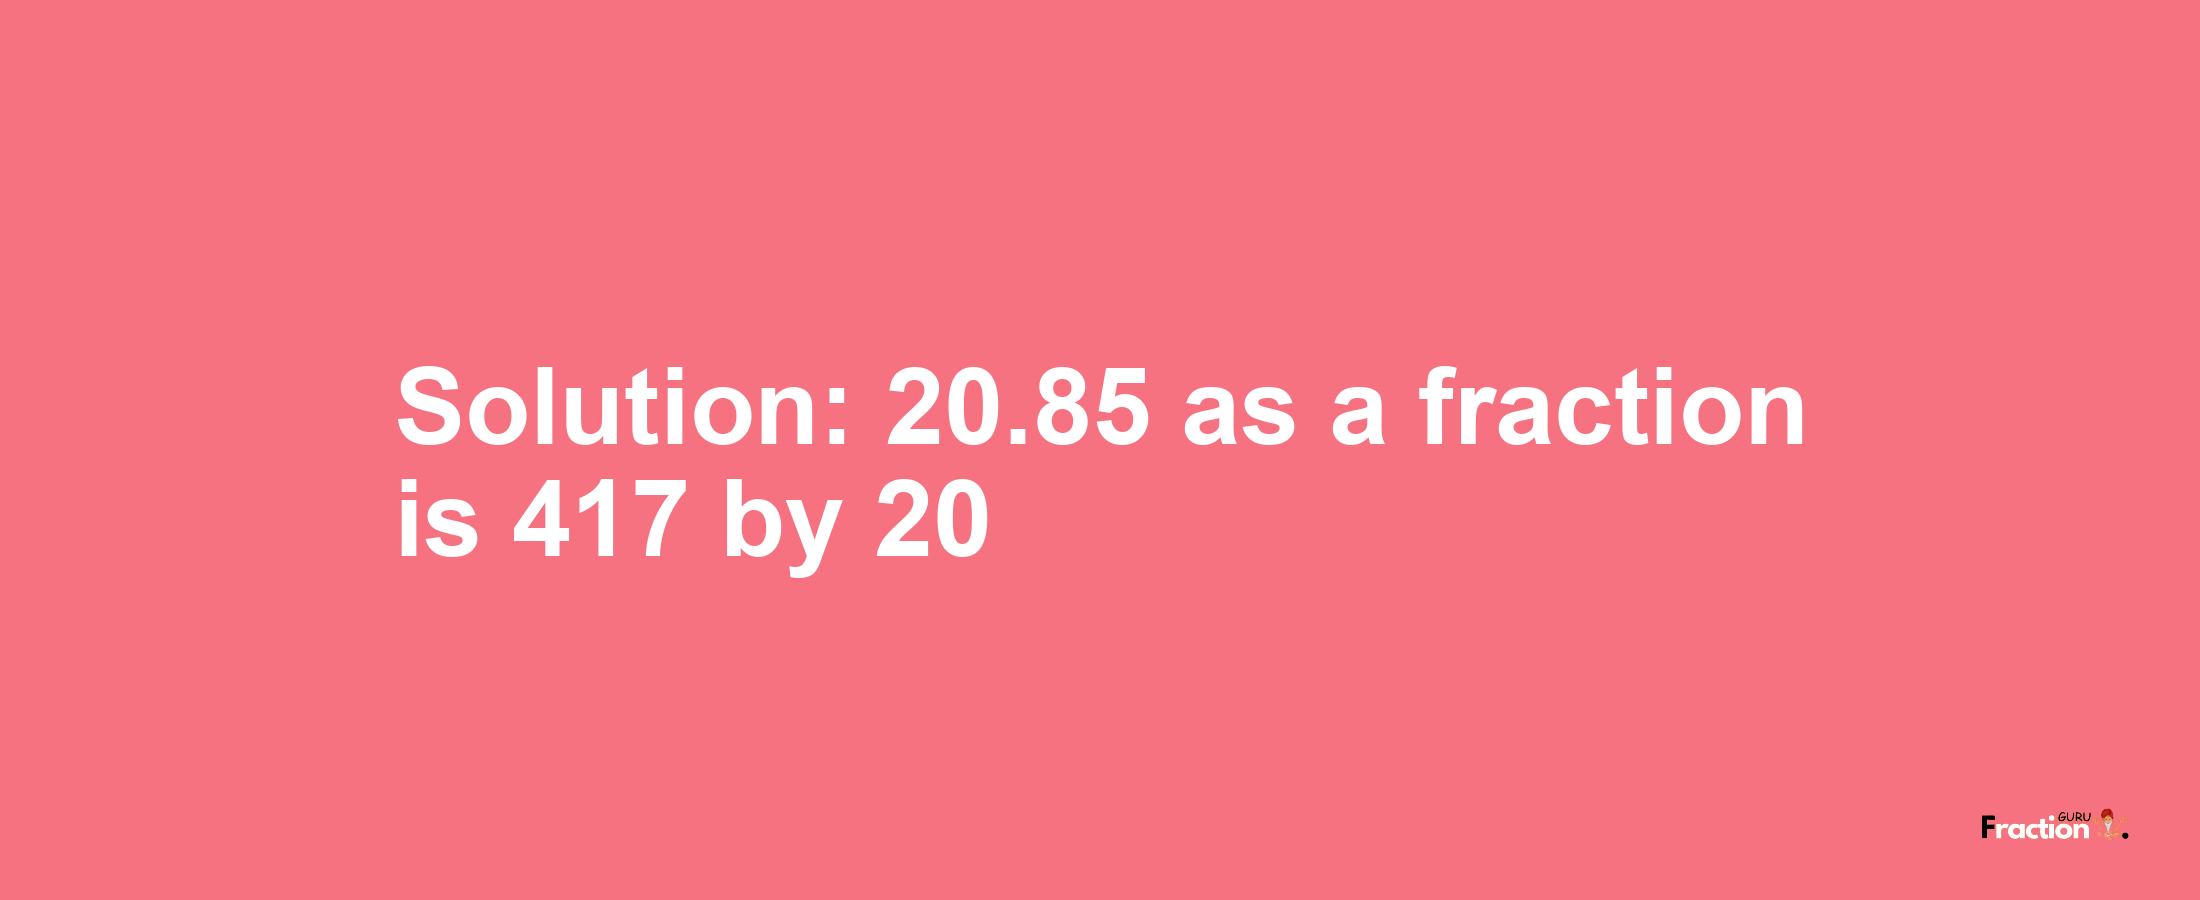 Solution:20.85 as a fraction is 417/20